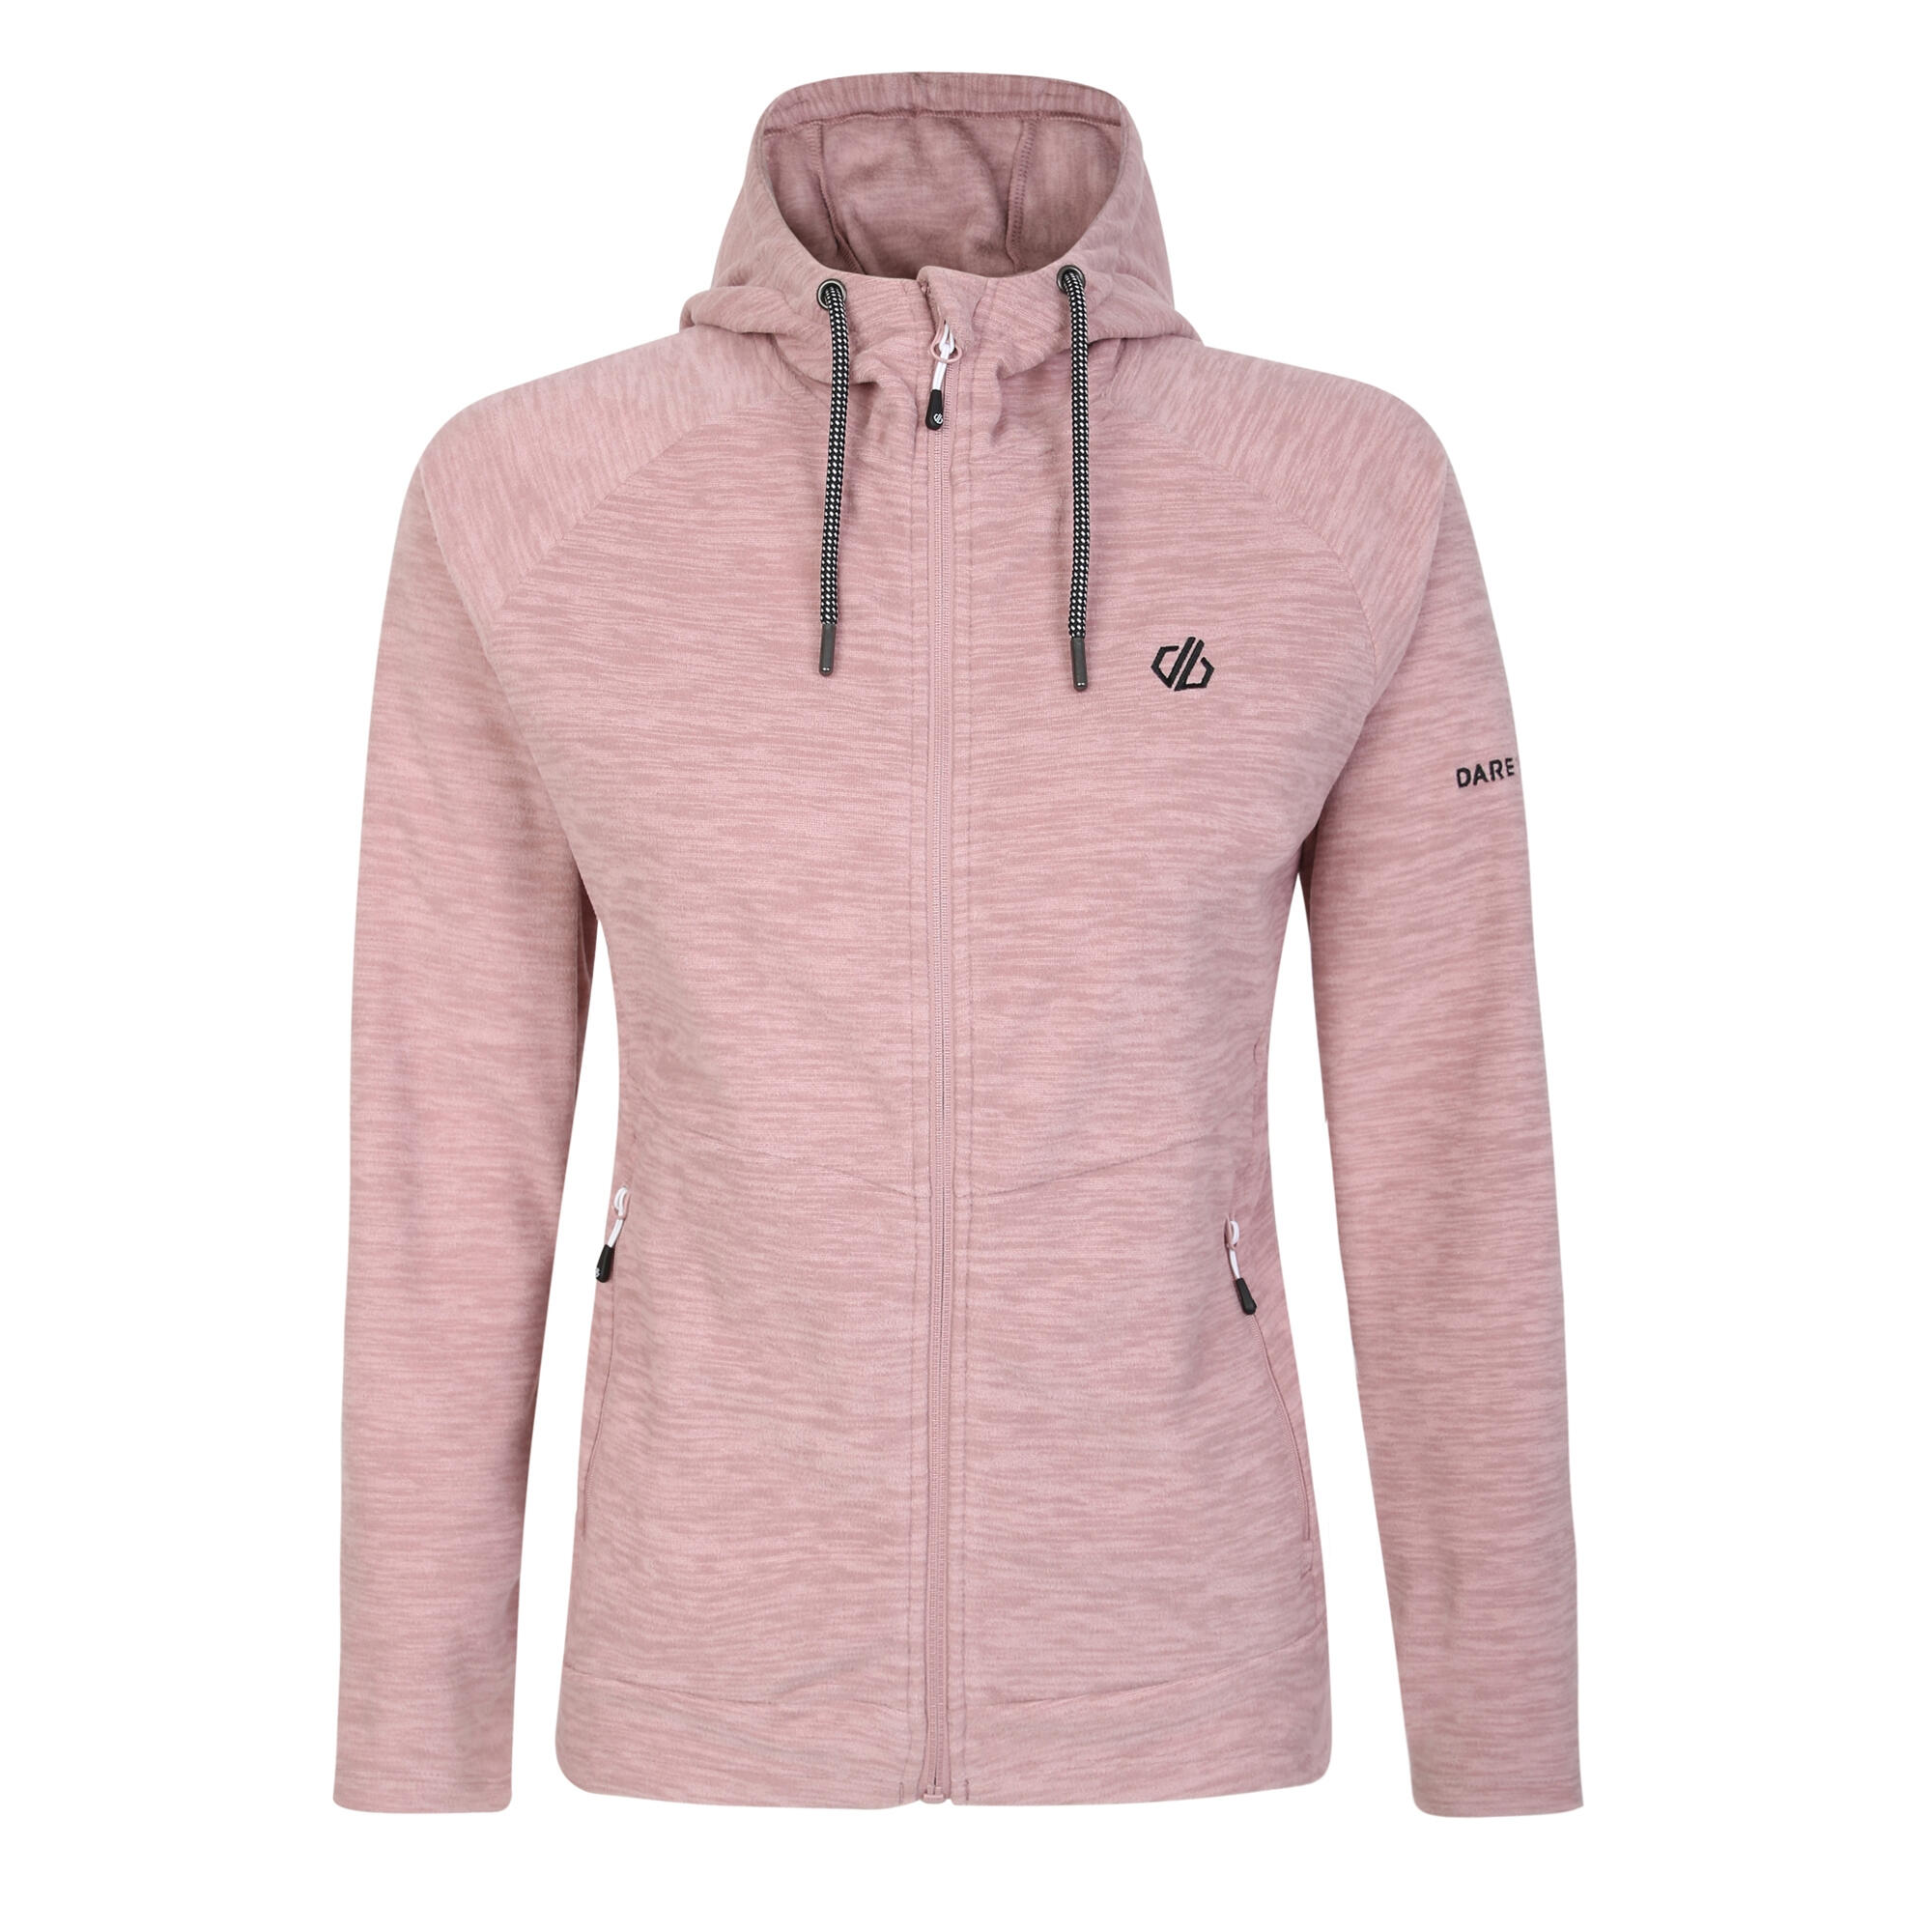 Womens/Ladies Out & Out Marl Full Zip Fleece Jacket (Dusky Rose) 1/4